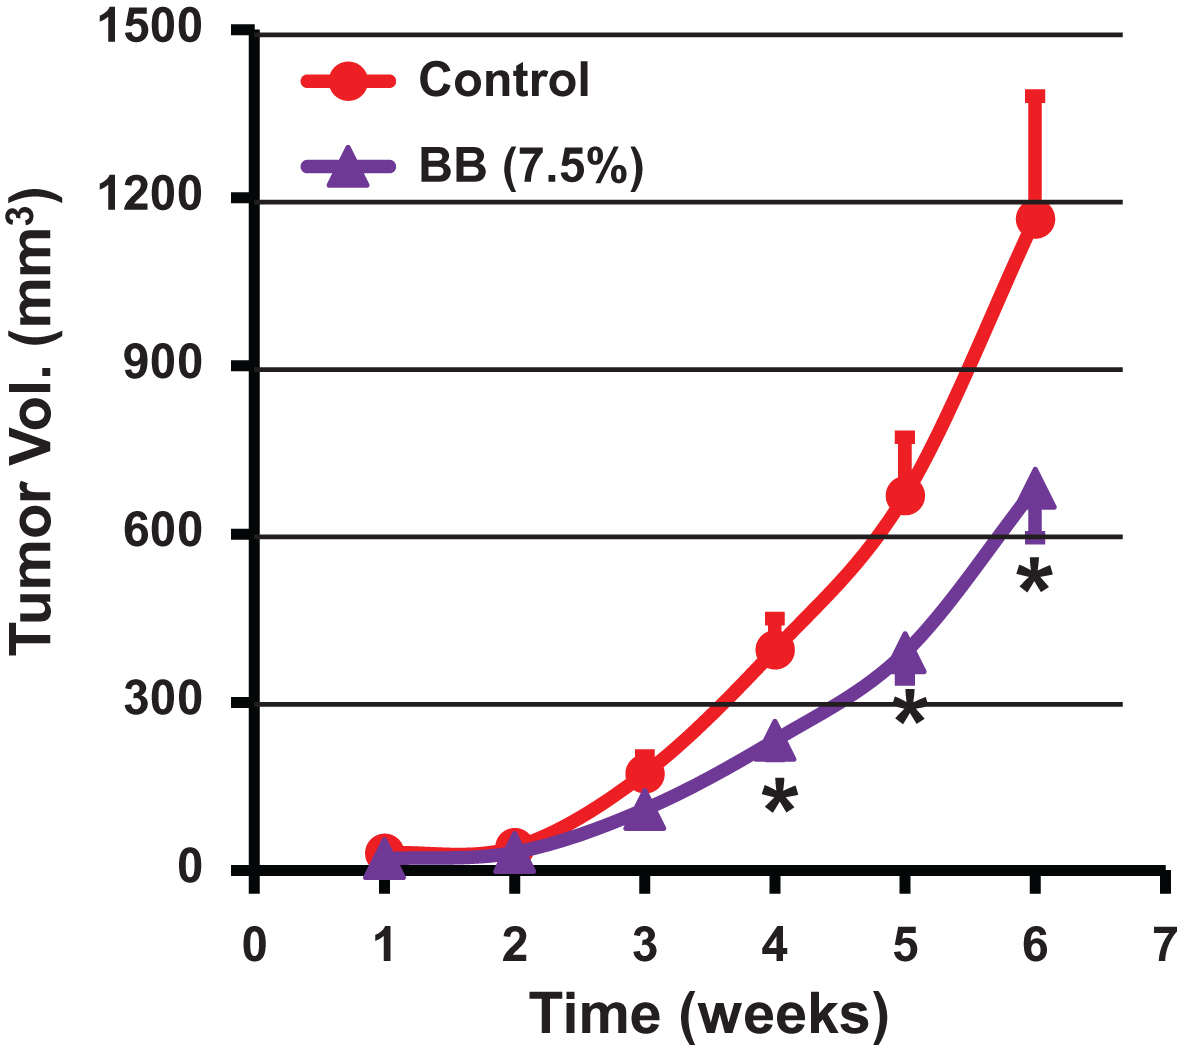 Antitumor activity of dietary blueberry (BB) powder against lung cancer tumor xenograft in nude mice. Animals were inoculated with human lung cancer H1299 cells (1.5 × 106 cells) and tumor volume was measured weekly until end of the study (6 weeks). Mice (n = 9) were fed either a control diet (AIN 93M) or diet supplemented with blueberry powder (7.5% w/w). p value <0.05 was considered significant (two-tailed Student’s t test).